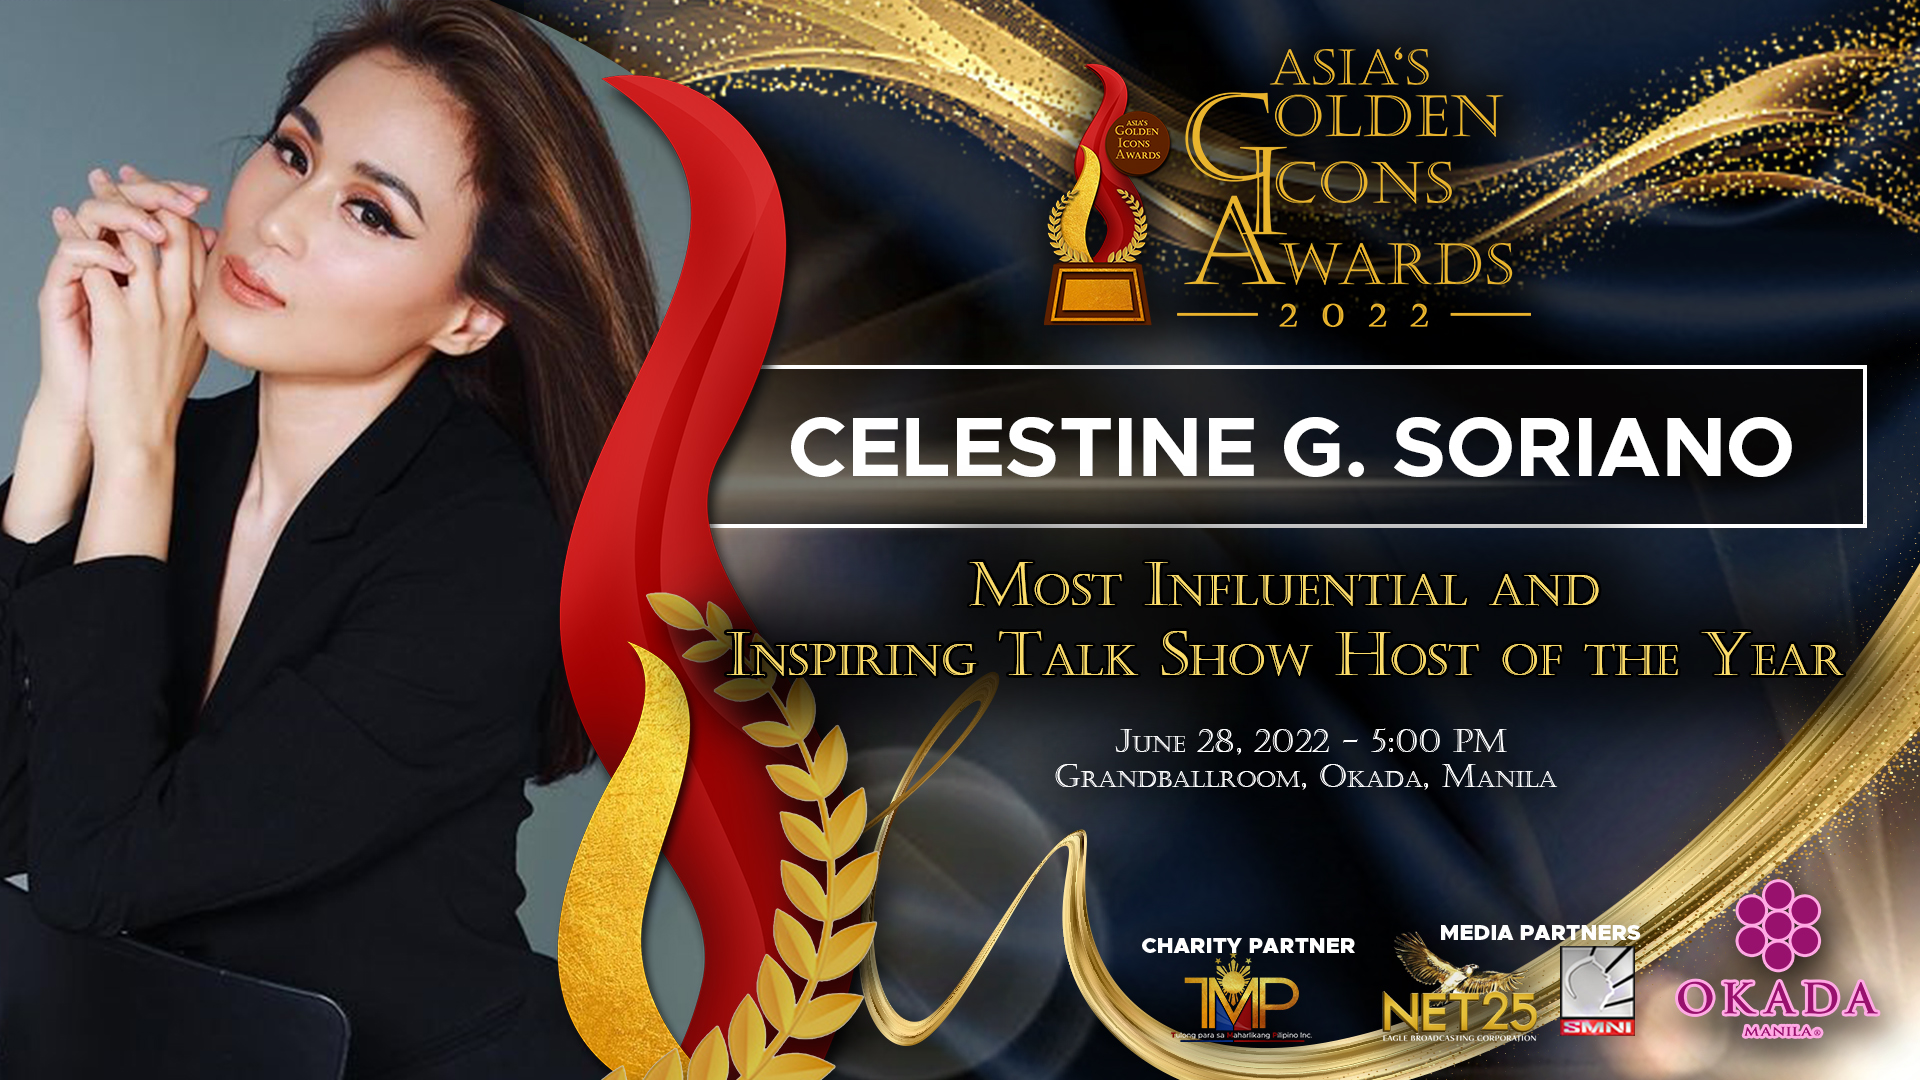 Celestine Soriano (Most Influential and Inspiring Talk Show Host of the Year)